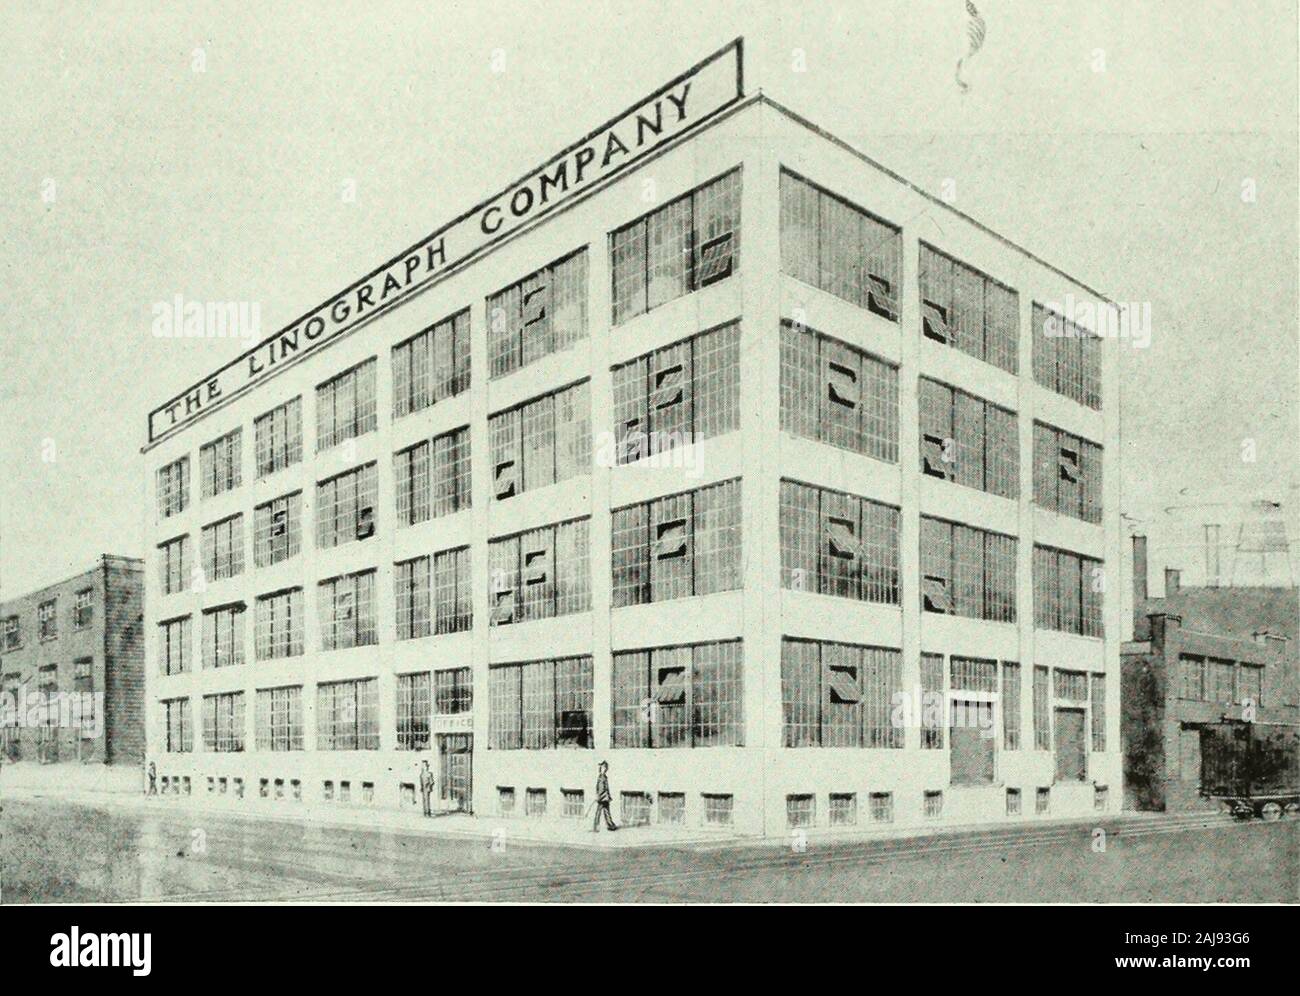 Canadian printer & publisher . LINOTYPE & MACHINERY LIMITED c/o CANADIAN LINOTYPE LIMITED 68 TEMPERANCE STREET, TORONTO Say vou saw it in PUINTKH .Nlt PUBLISIIBK P 11 T N T E M A N D P U P&gt; L I S H E R The Linograph Factory. Up to the present time tlie LINOGRAPHhas been made in crowded quarters andthere have been manj inconveniences anddiflficnhies connected with its manufac-ture. Now we are moving into this mag-nificent new building, an all-daylightplant of five floors, with every modernconvenience for our employees and everyfacility for successful manufacture. ^^e desire to express our a Stock Photo